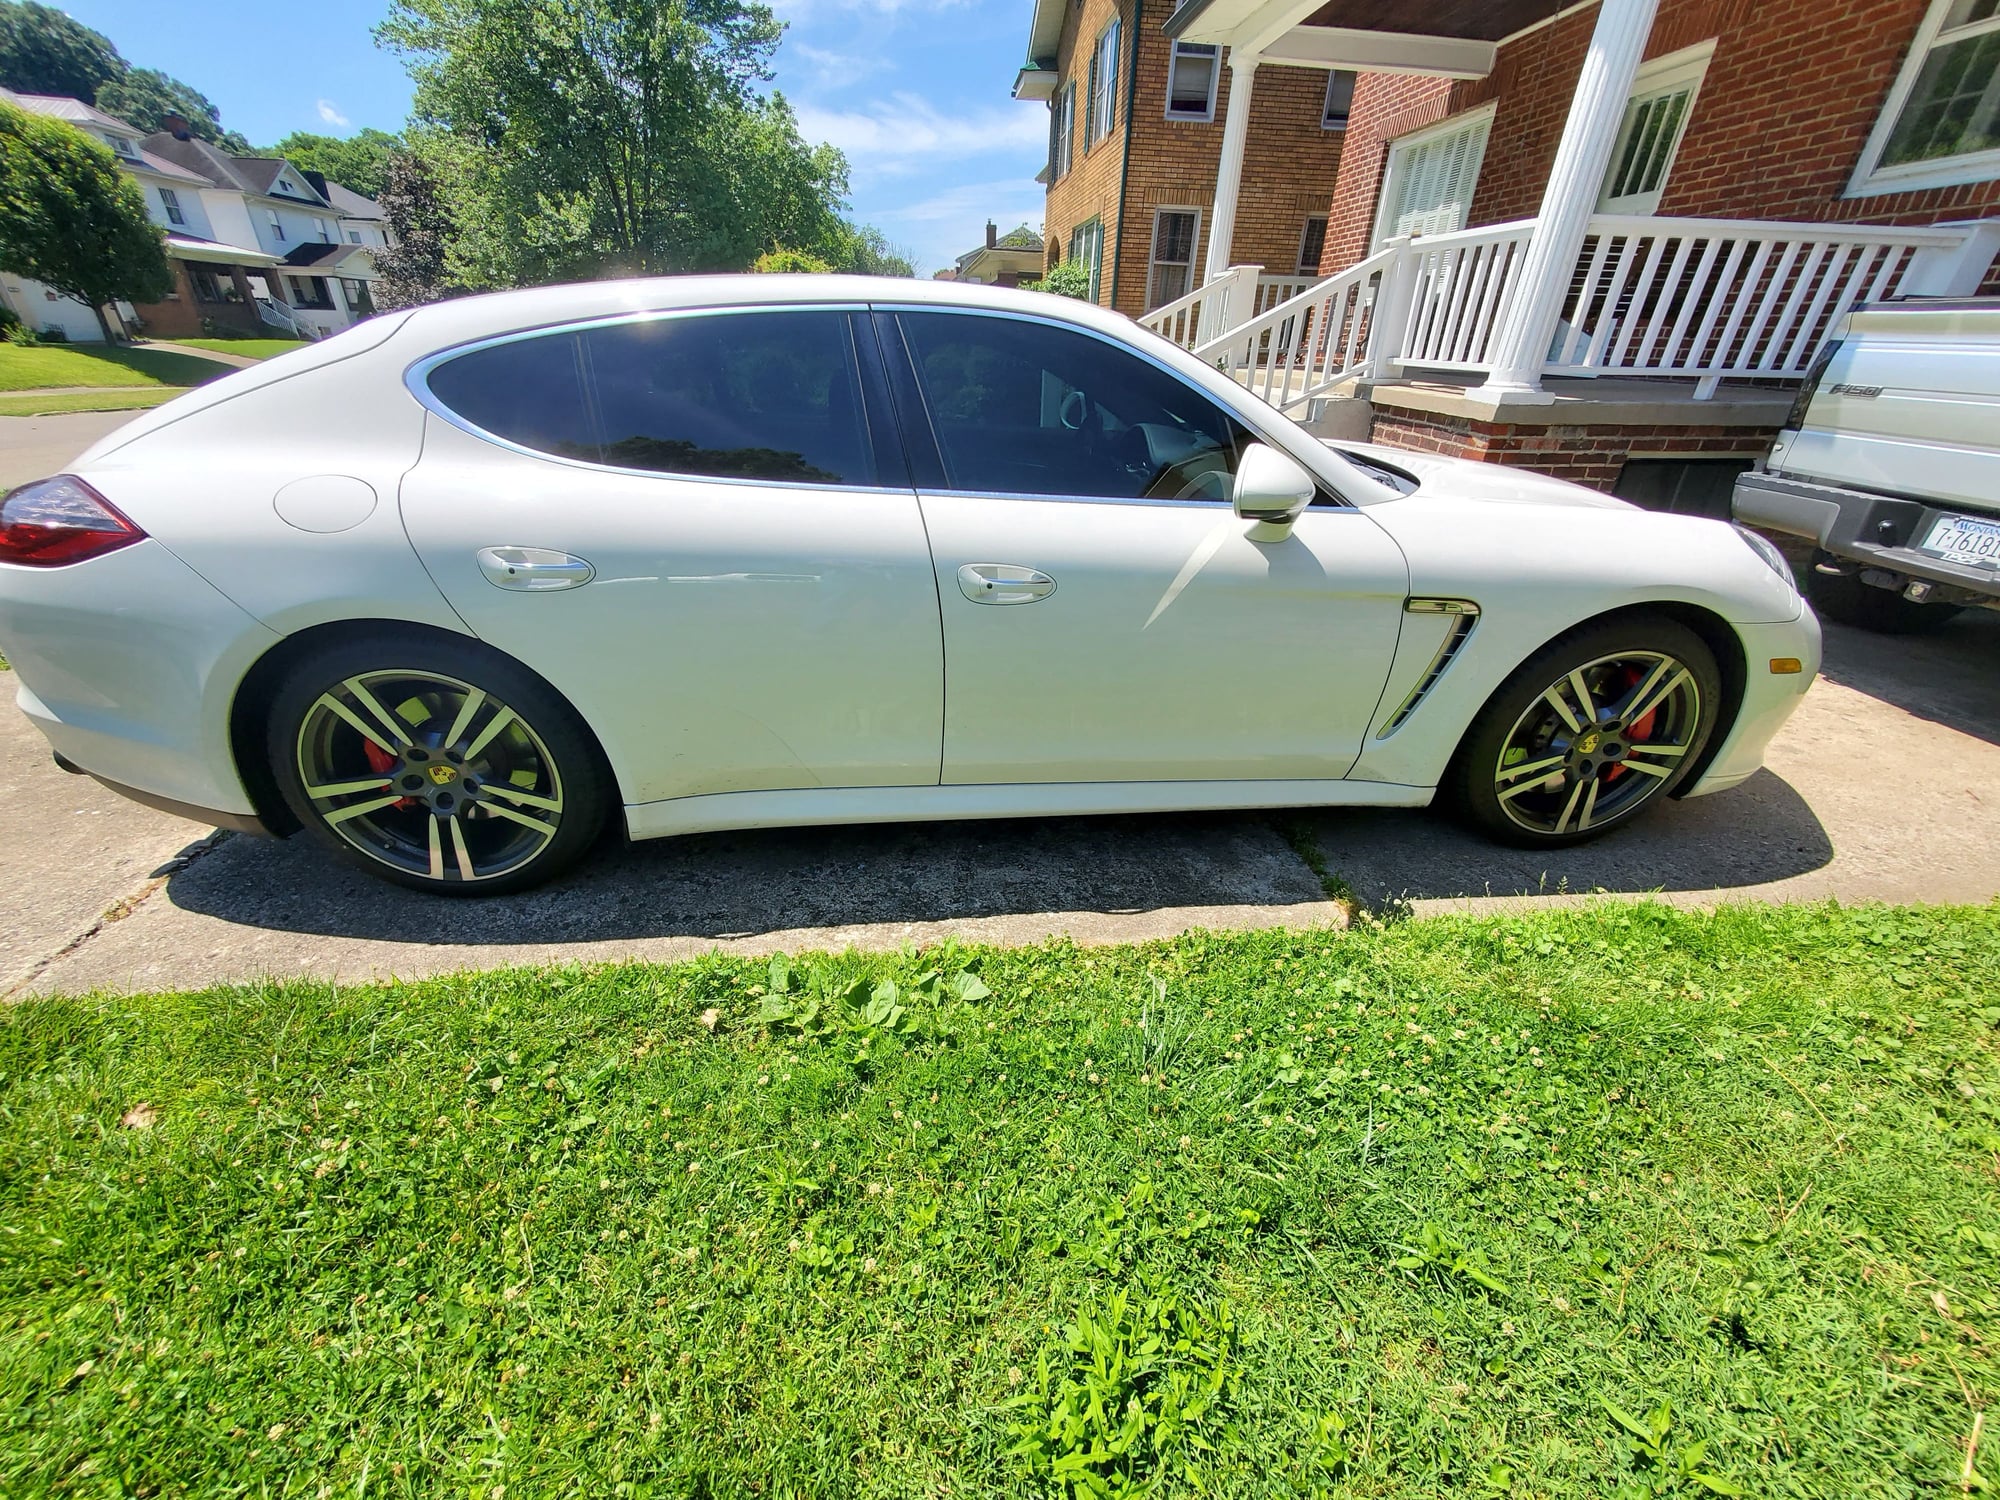 2011 Porsche Panamera - 2011 Panamera Turbo White/Cocoa and Carbon Fiber - Used - VIN WP0AC2A71BL090165 - 90,450 Miles - 8 cyl - AWD - Automatic - Sedan - White - Portsmouth, OH 45662, United States